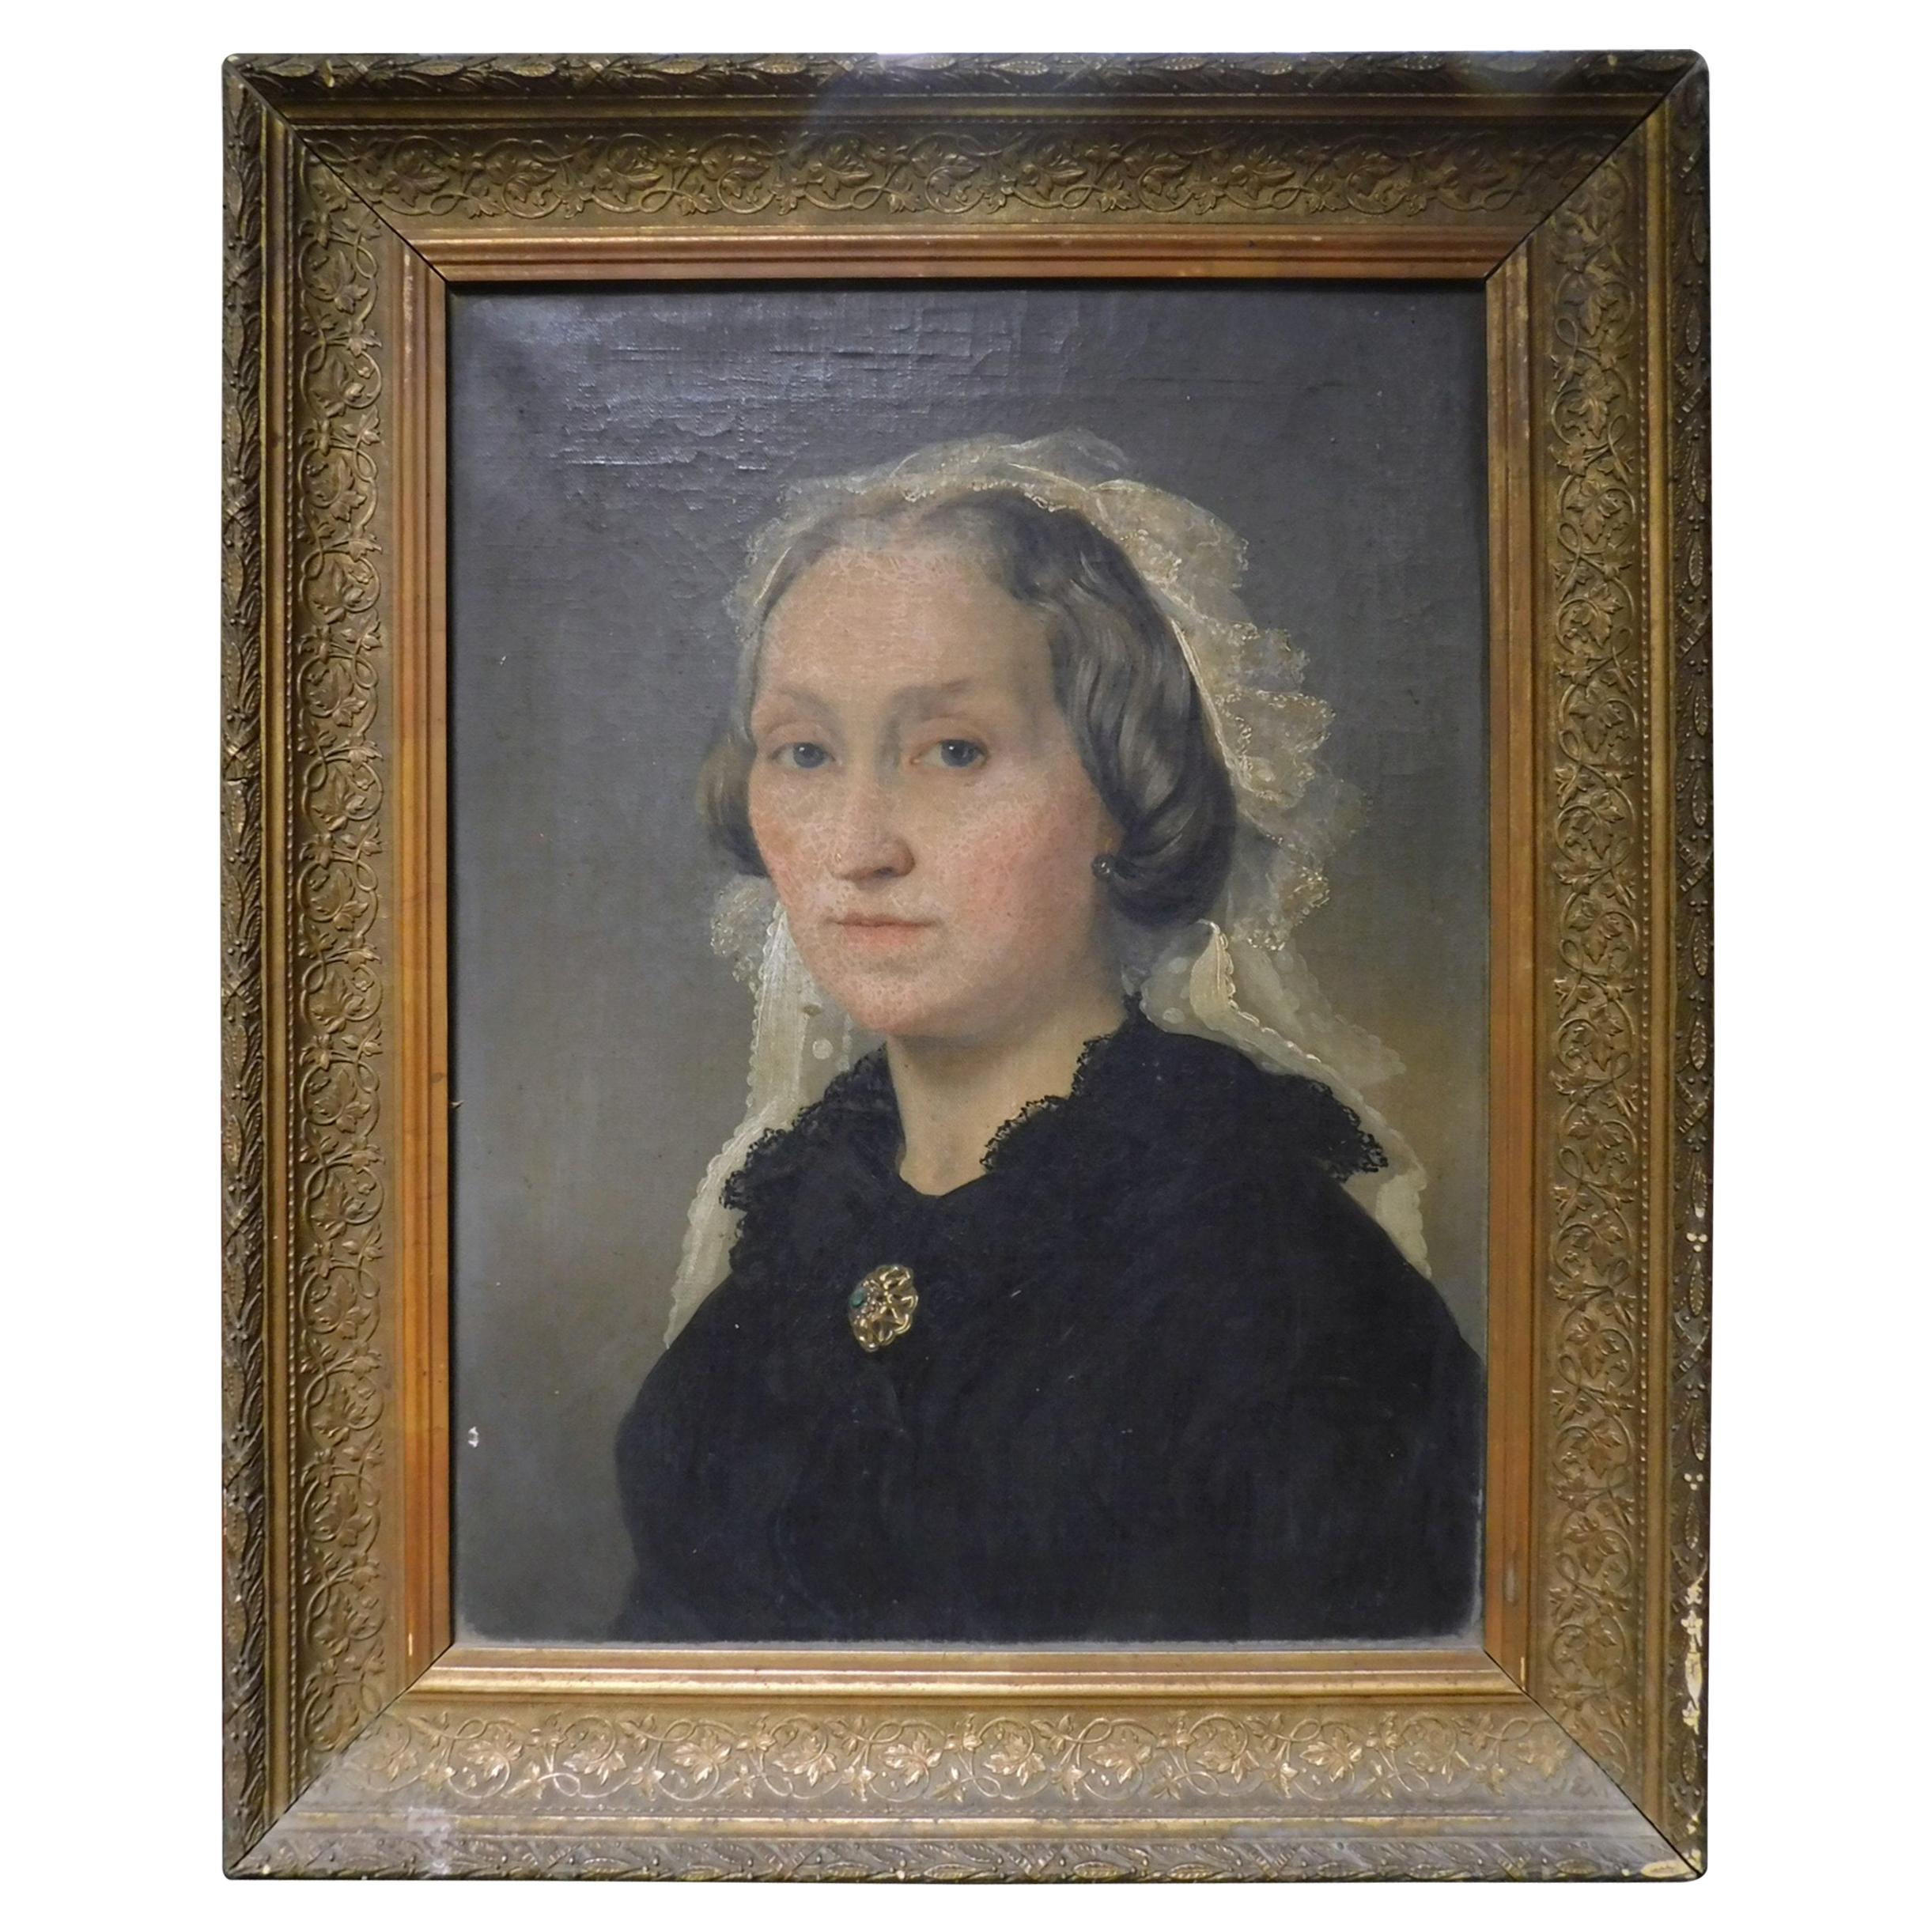 Antique Woman Portrait Painting, Oil on Canvas with Golden Frame, 1800, Italy